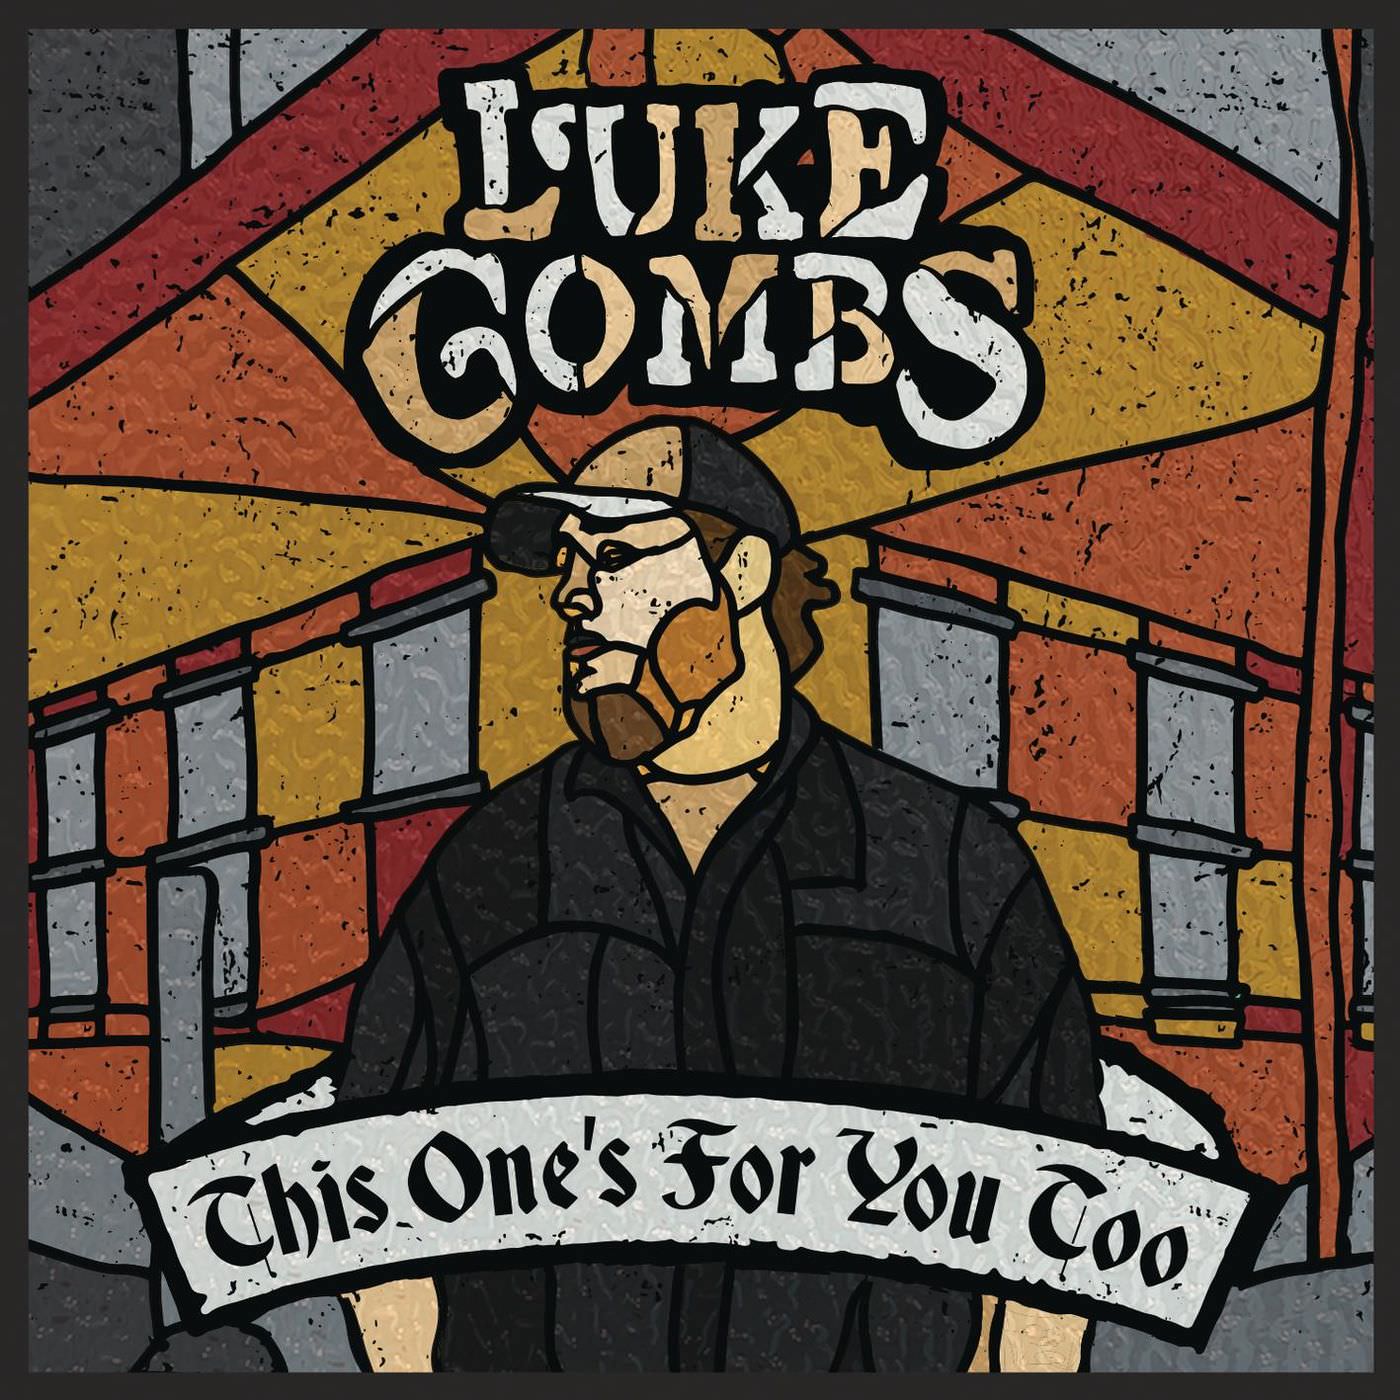 Luke Combs – This One’s for You Too (Deluxe Edition) (2017/2018) [FLAC 24bit/44,1kHz]